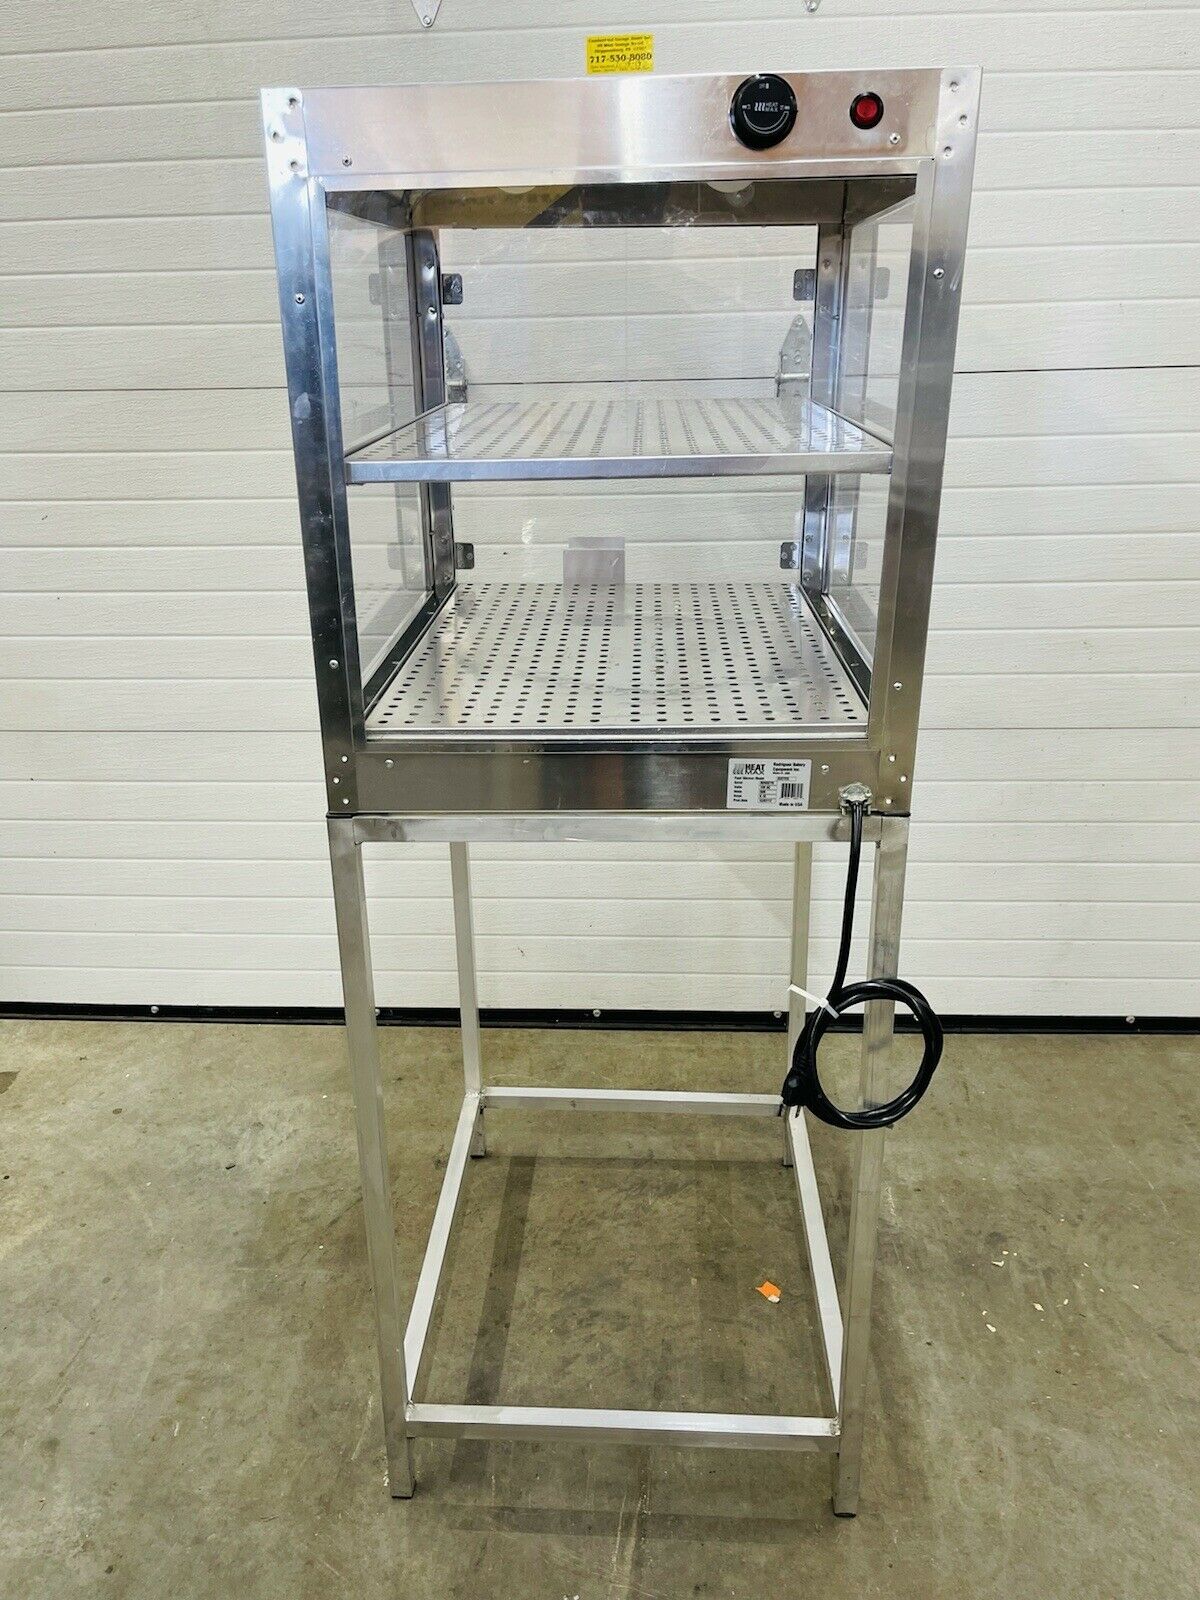 HeatMax 222725 Bread Warmer Display w/ Stand Tested and Working